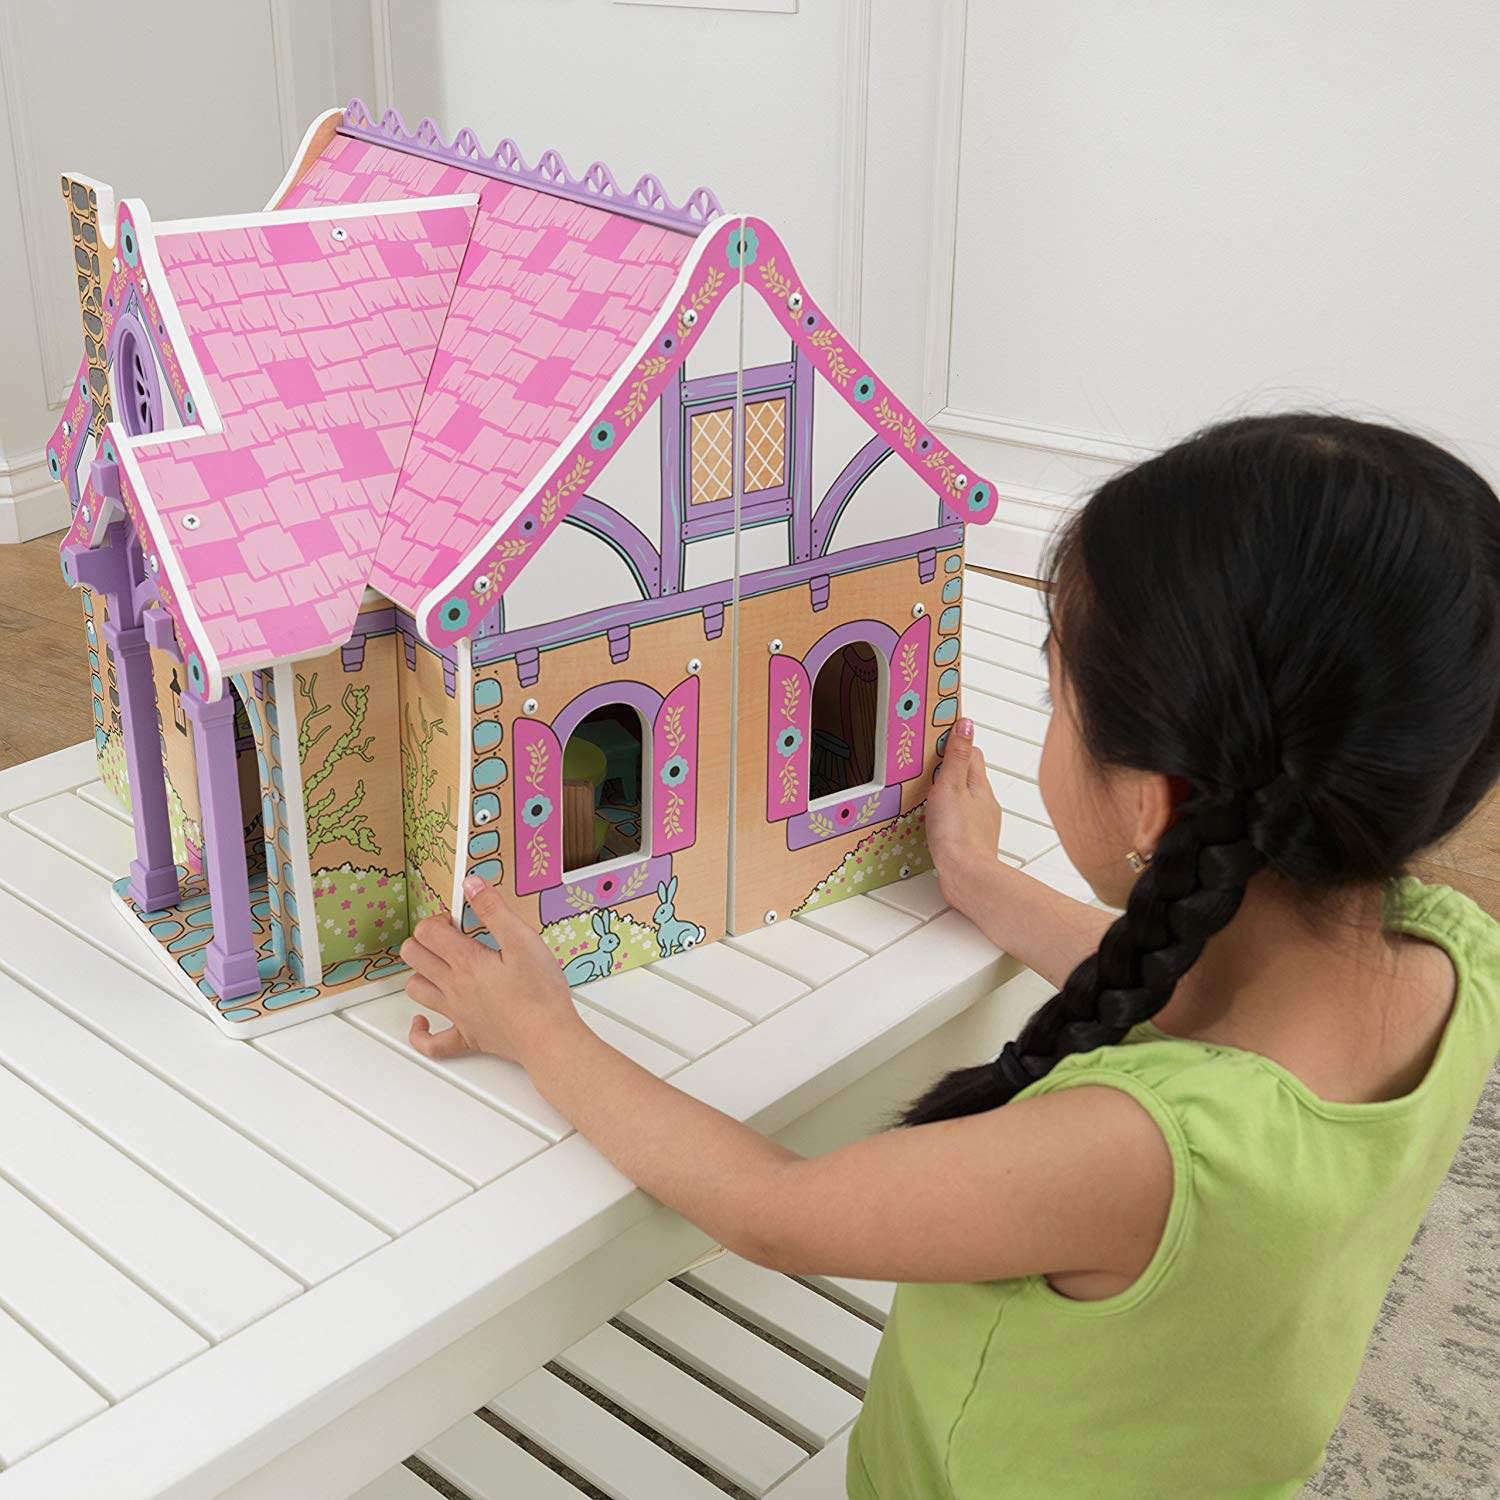 enchanted forest dollhouse